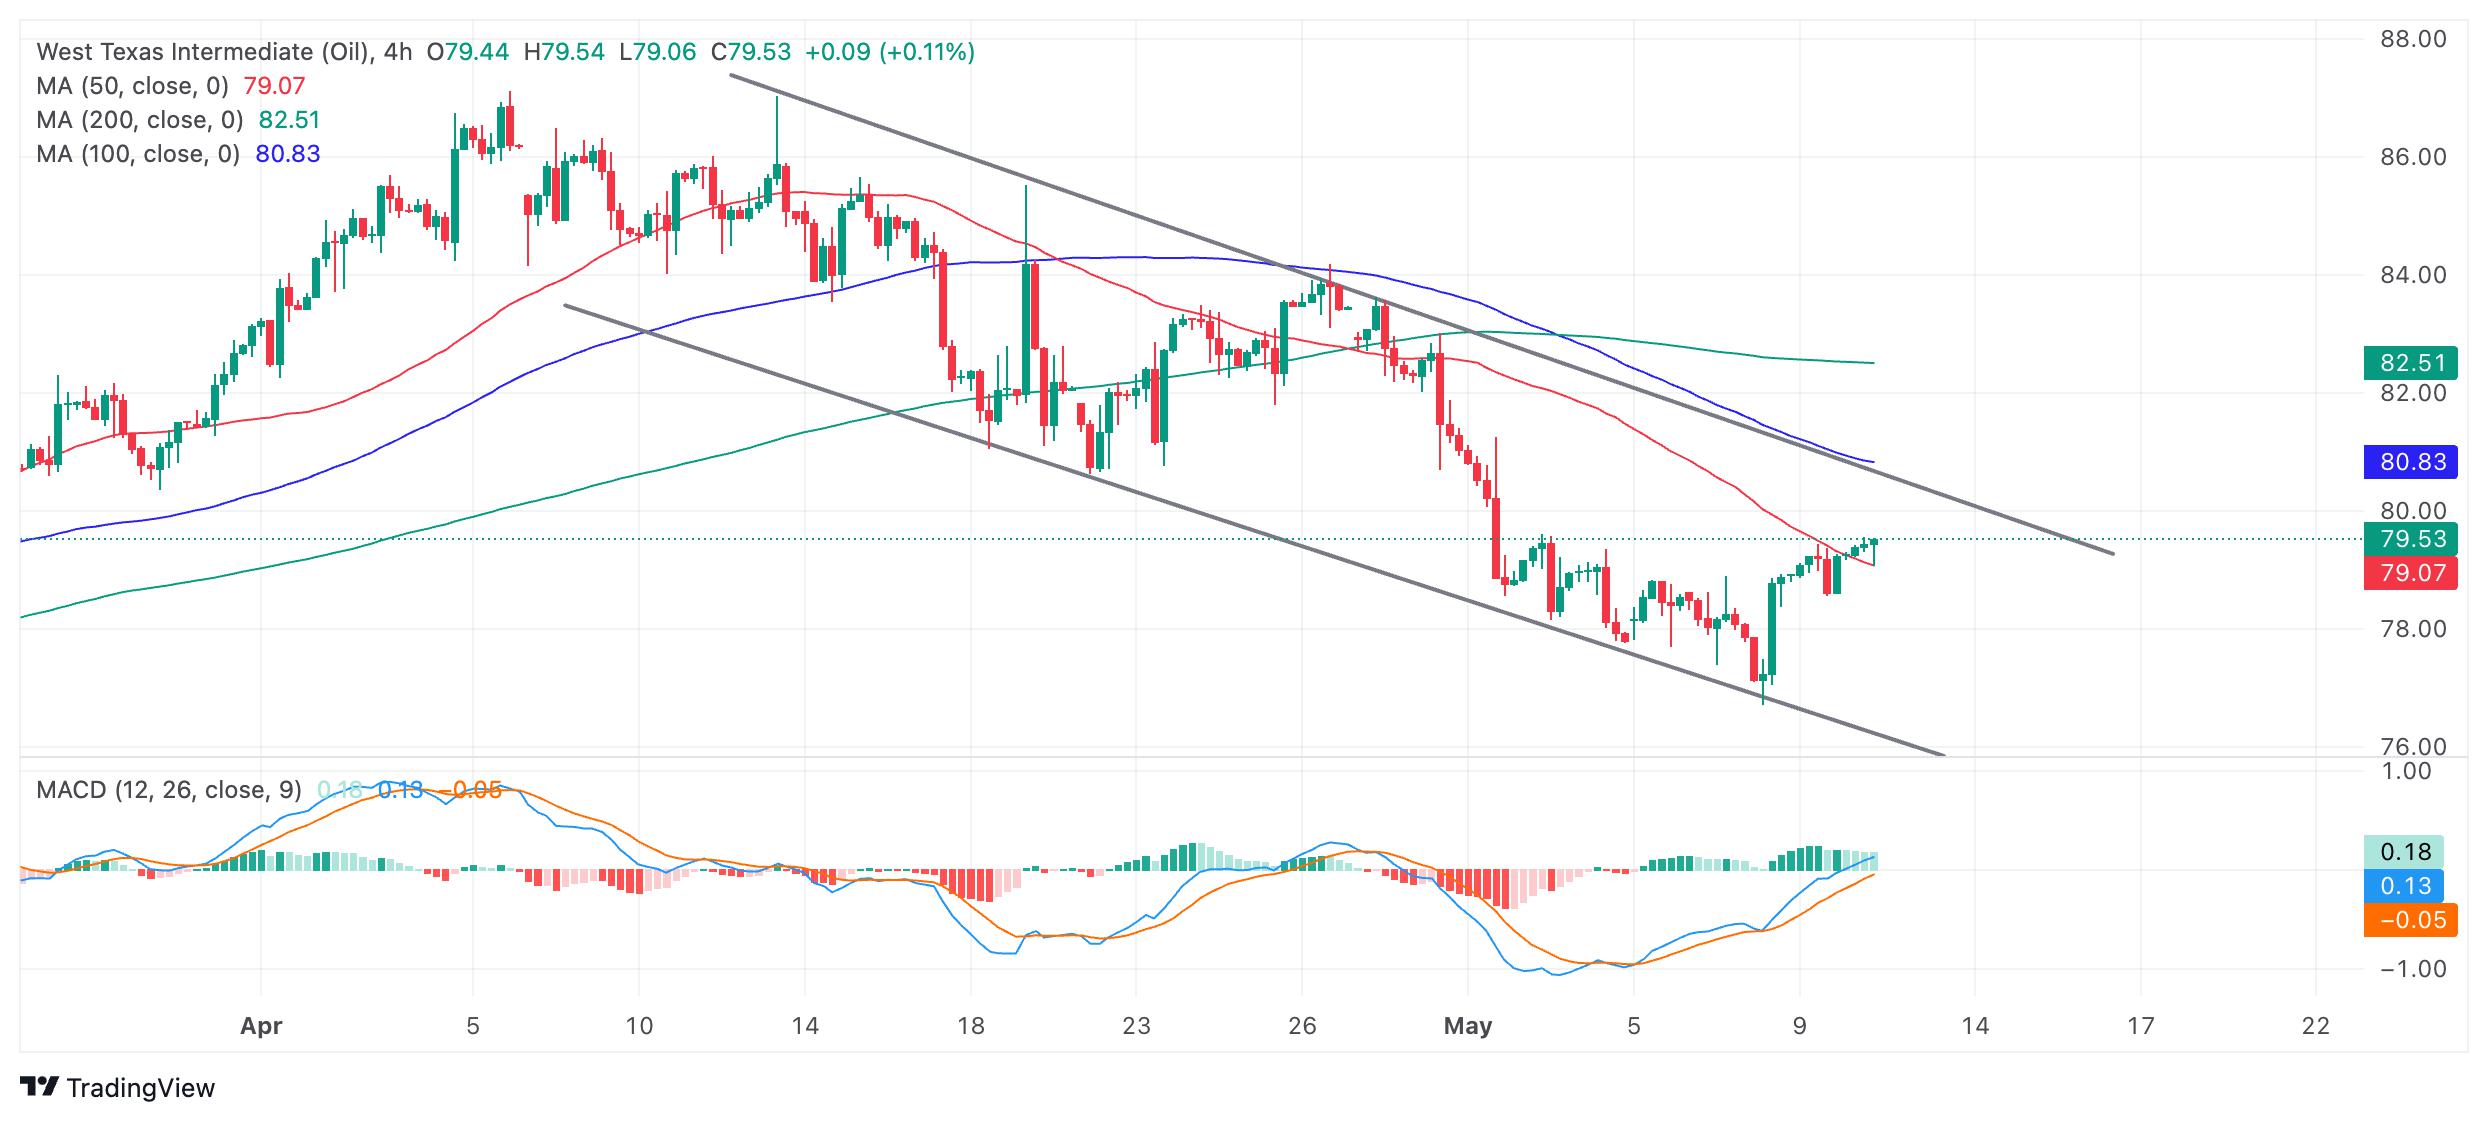 Oil Price Analysis: Falling in a channel over the short-term